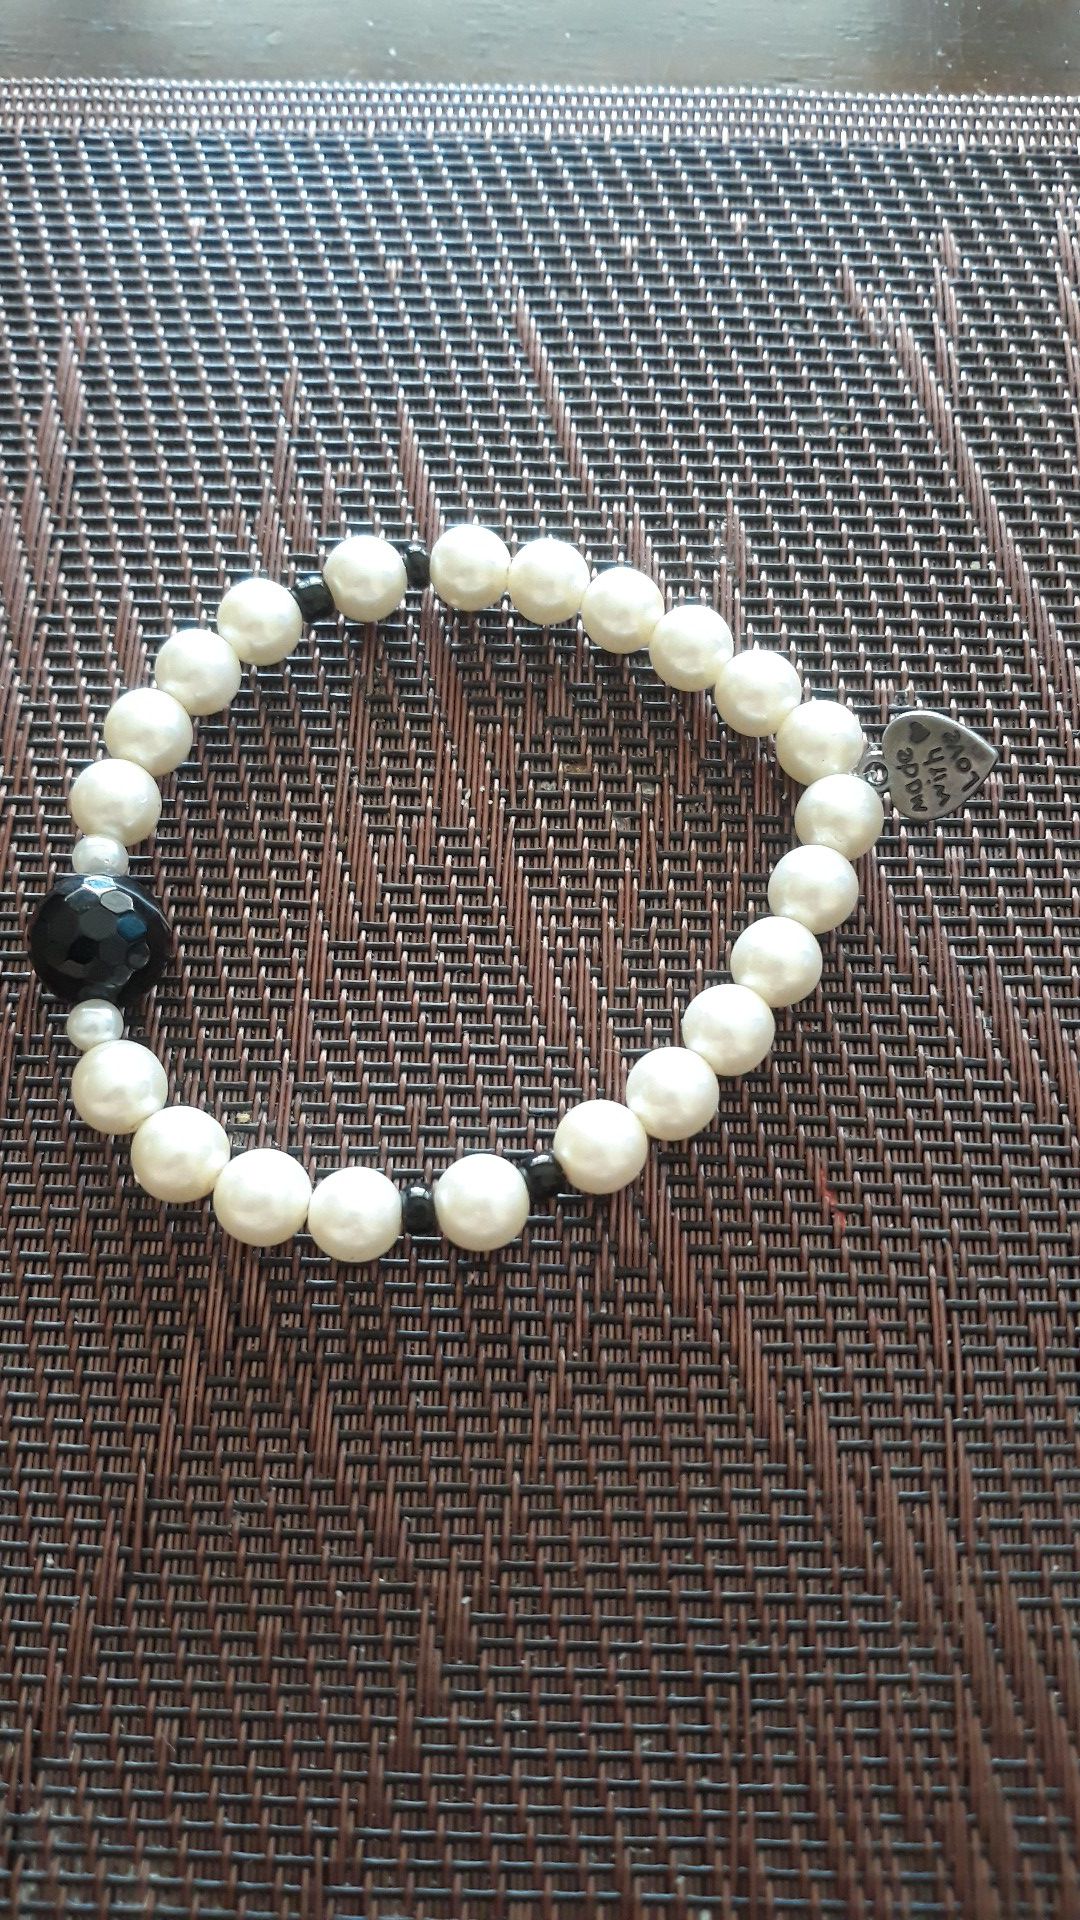 High Quality Handcrafted Hildie & Jo. Faux Pearl glass bracelet with a charm "made with love"